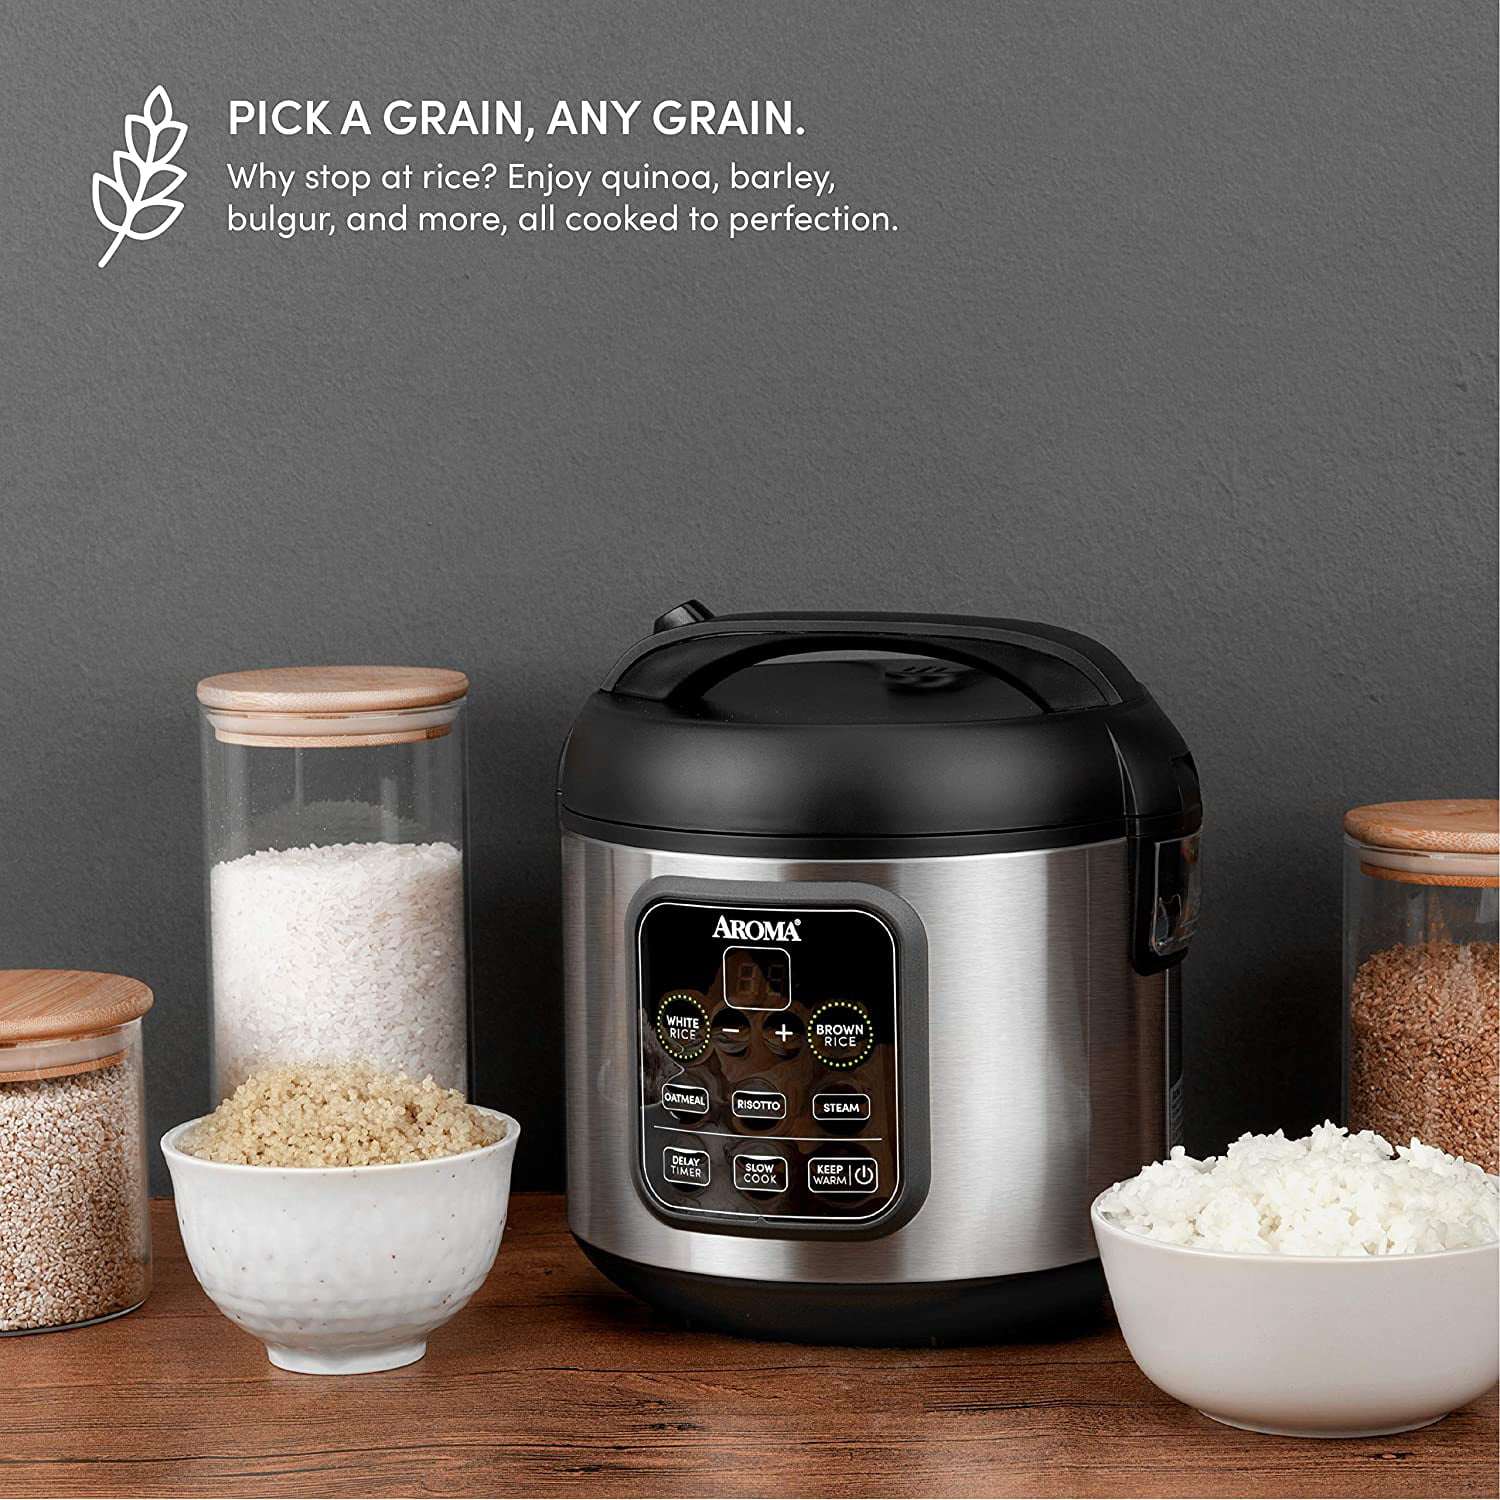 AROMA Digital Rice Cooker, 4-Cup (Uncooked) / 8-Cup (Cooked), Steamer,  Grain Cooker, Multicooker, 2 Qt, Stainless Steel Exterior, ARC-914SBD: Home  & Kitchen 